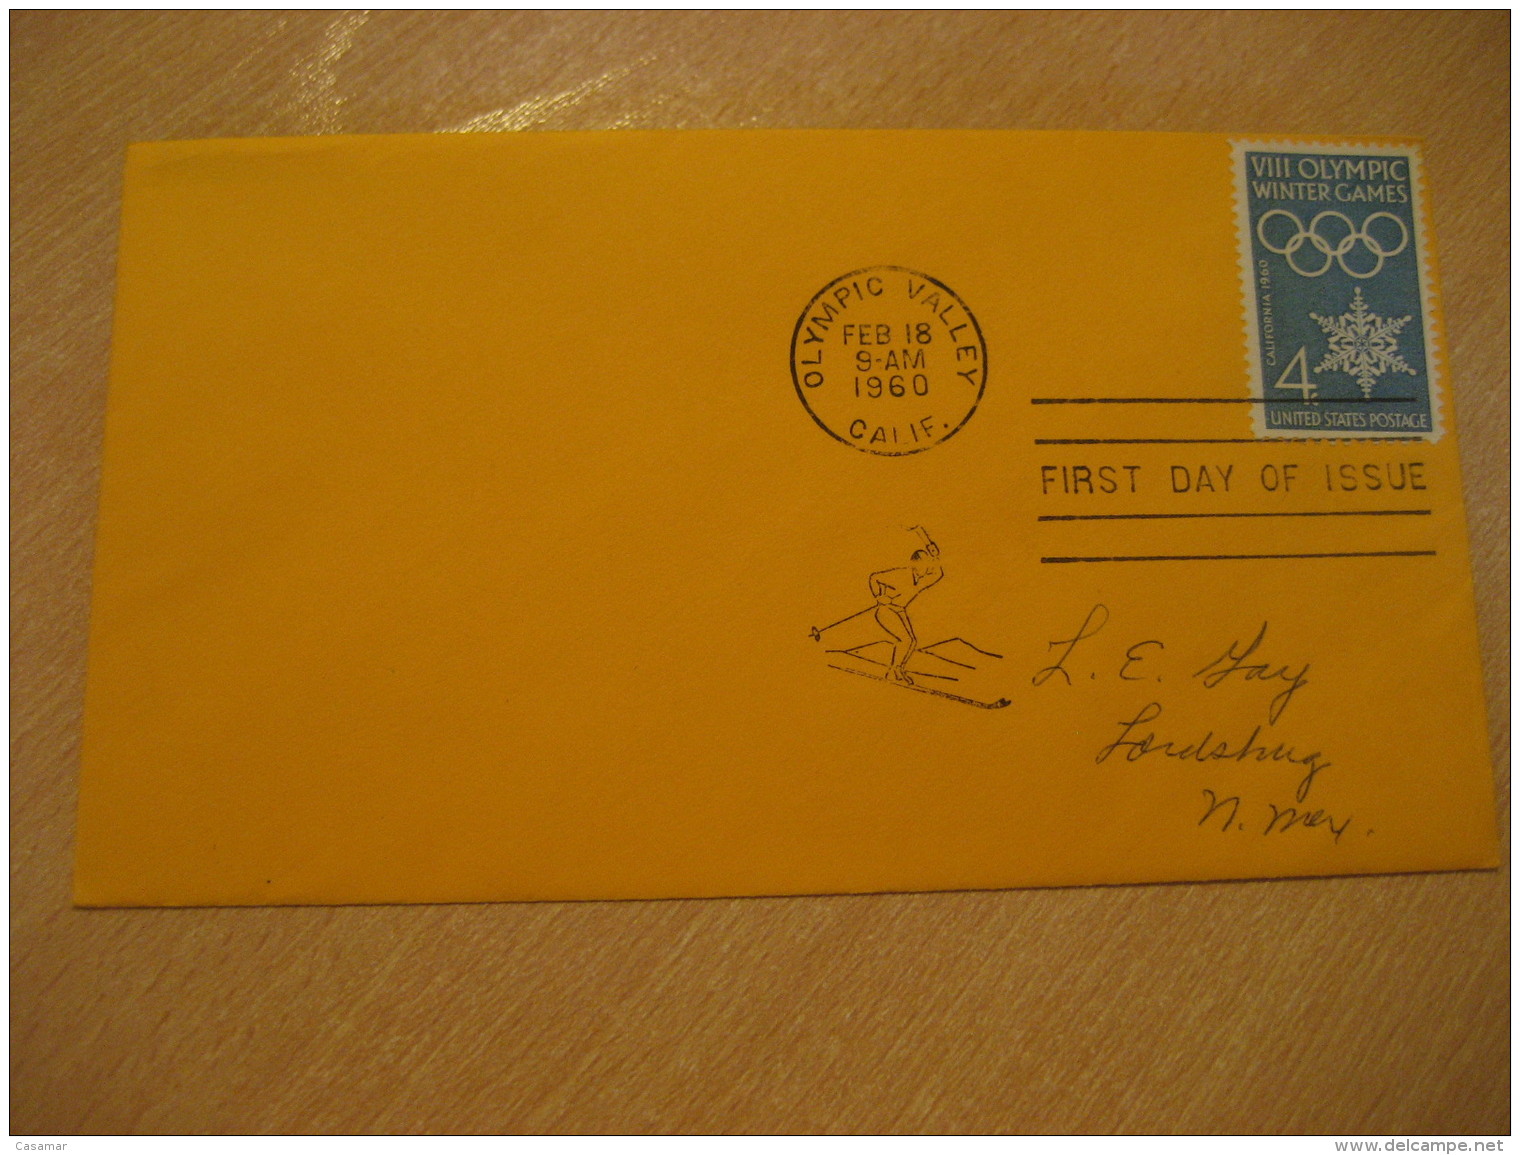 SQUAW VALLEY 1960 Winter Olympic Games Olympics OLYMPIC VALLEY 1960 FDC Cancel Cover USA - Invierno 1960: Squaw Valley